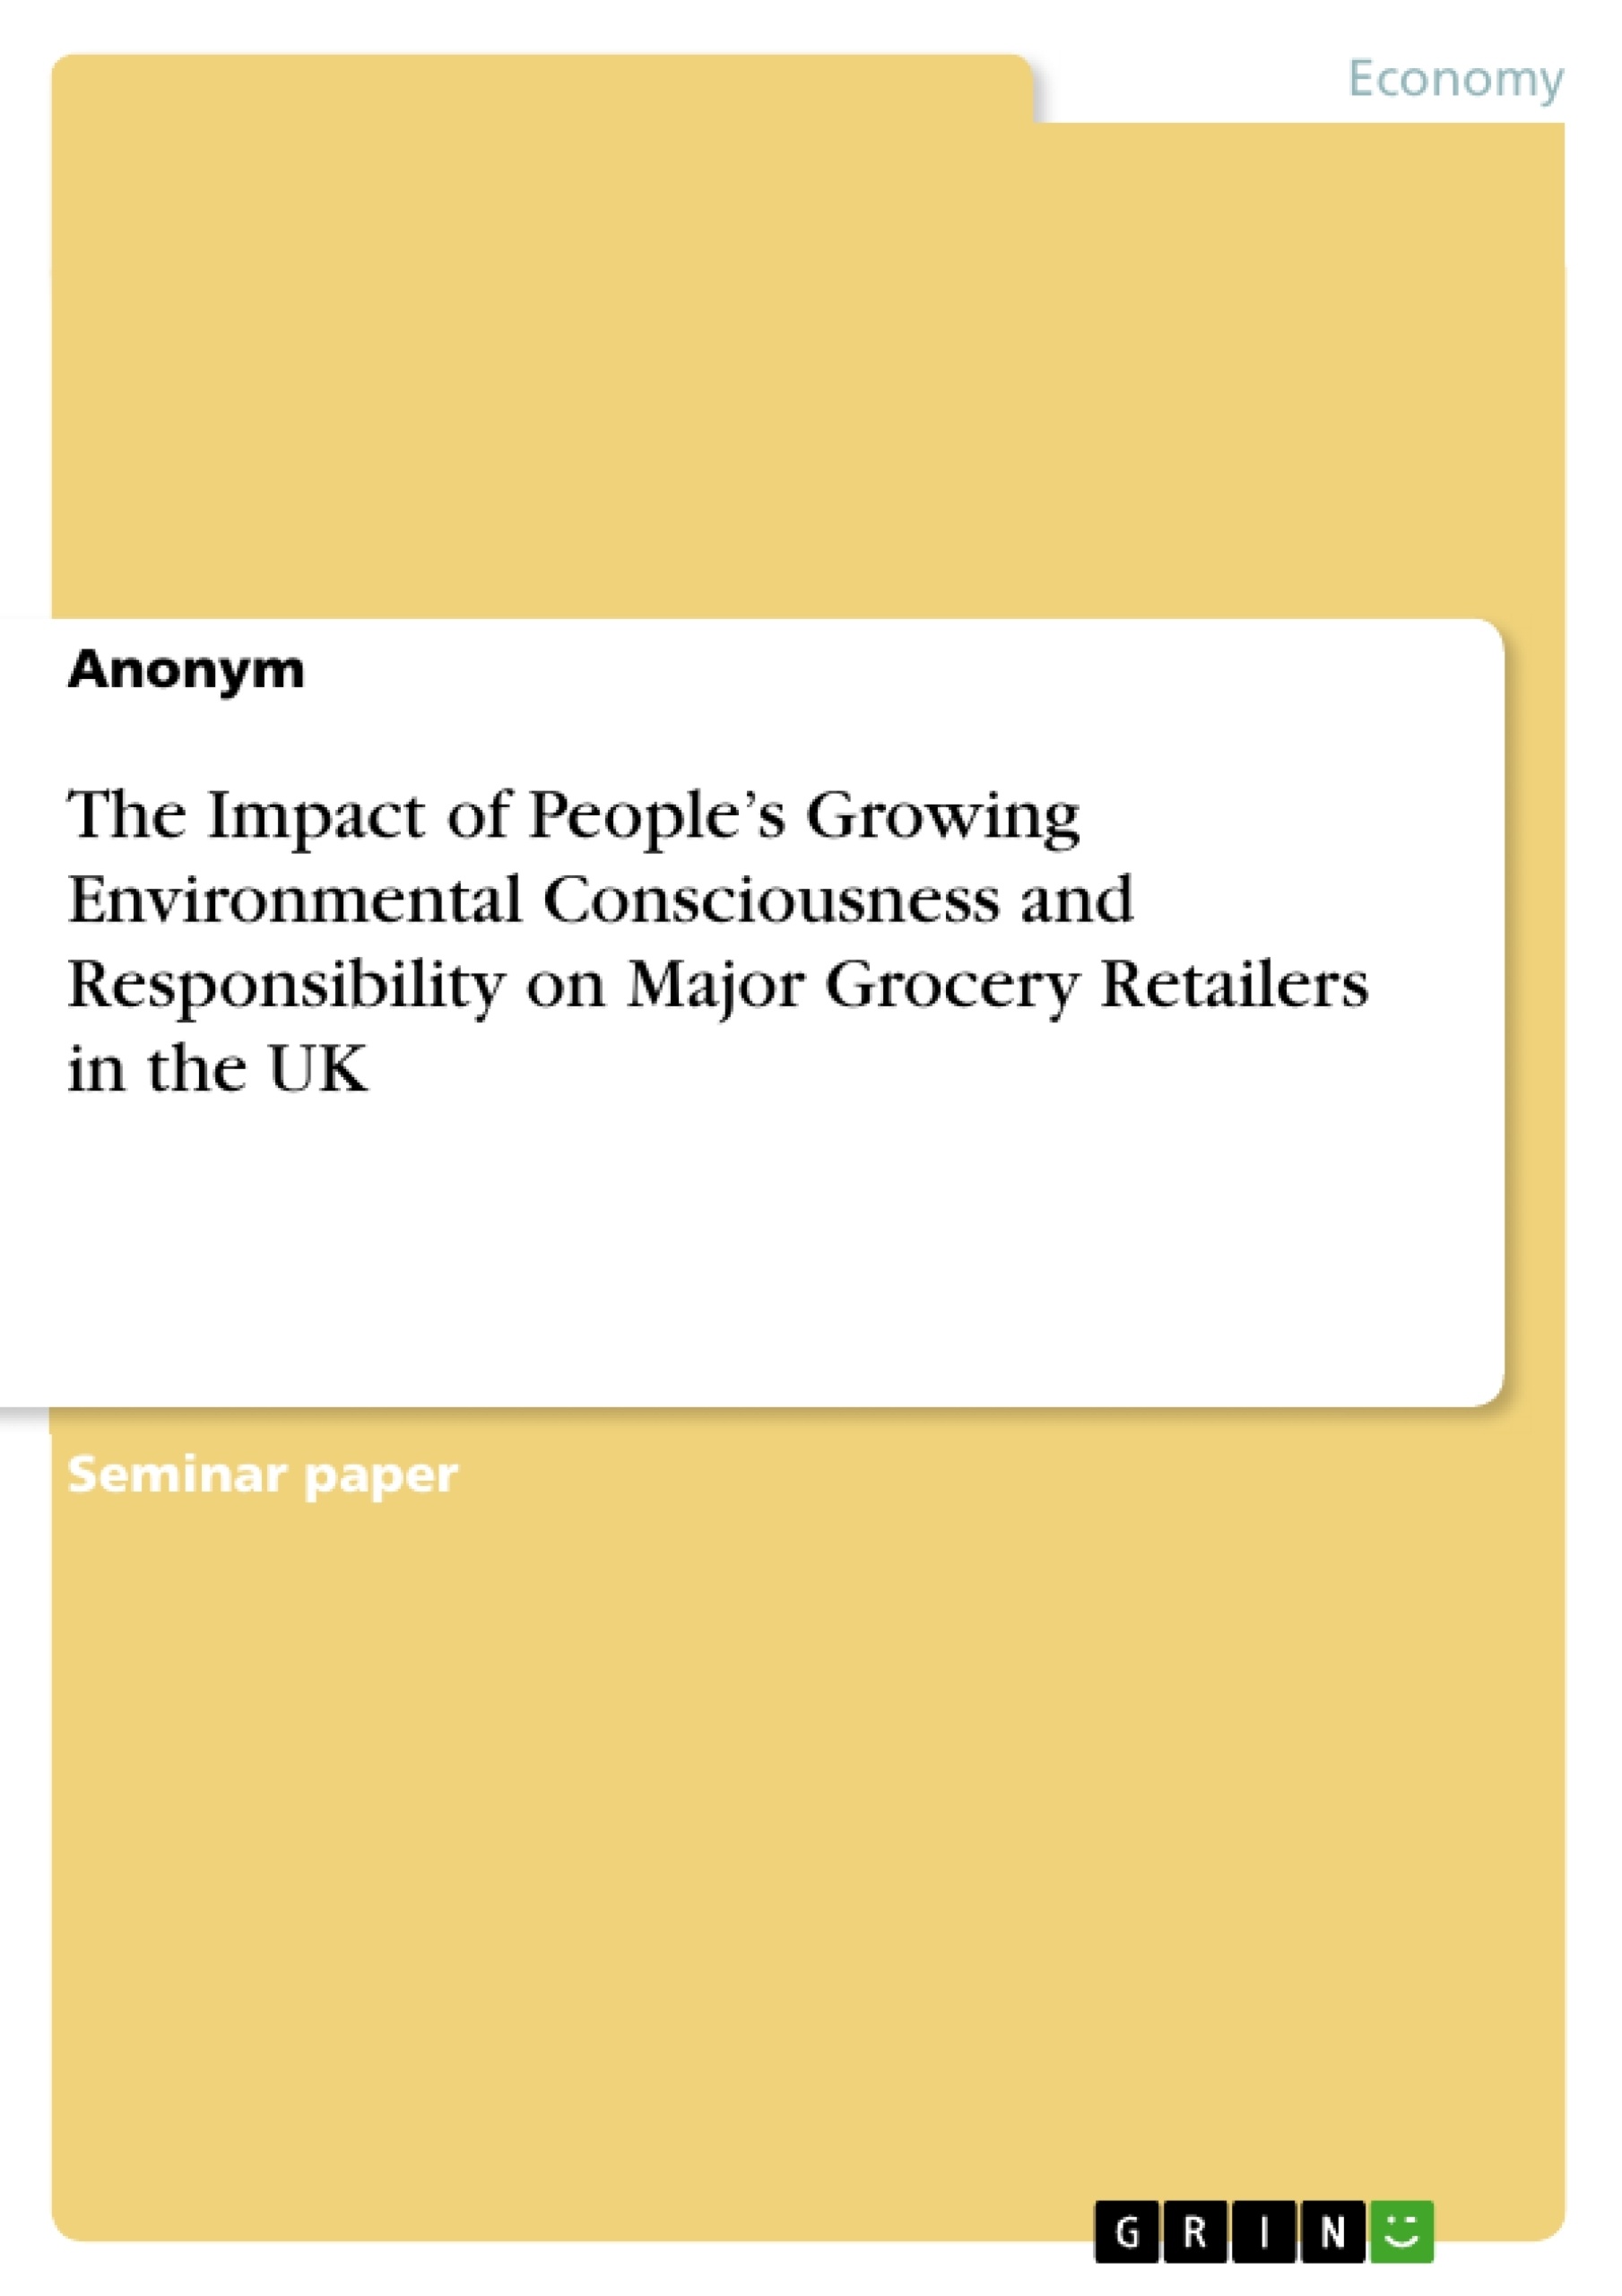 Título: The Impact of People’s Growing Environmental Consciousness and Responsibility on Major Grocery Retailers in the UK